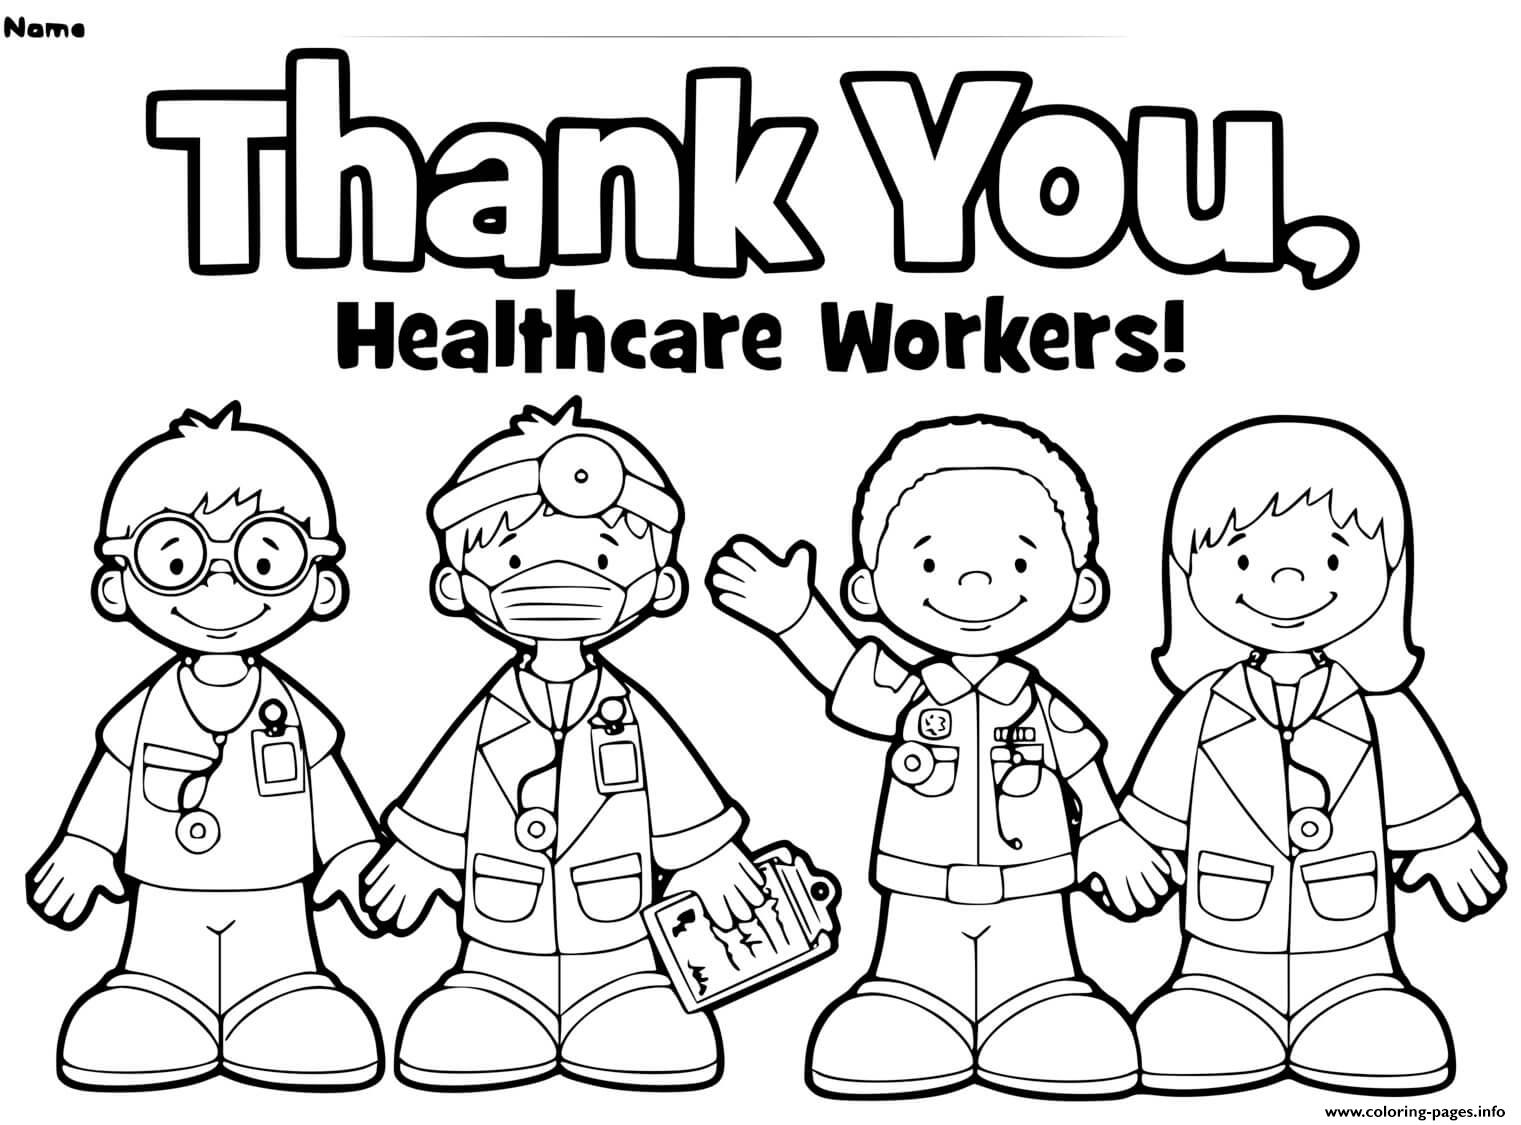 Thank You Healthcare Workers coloring